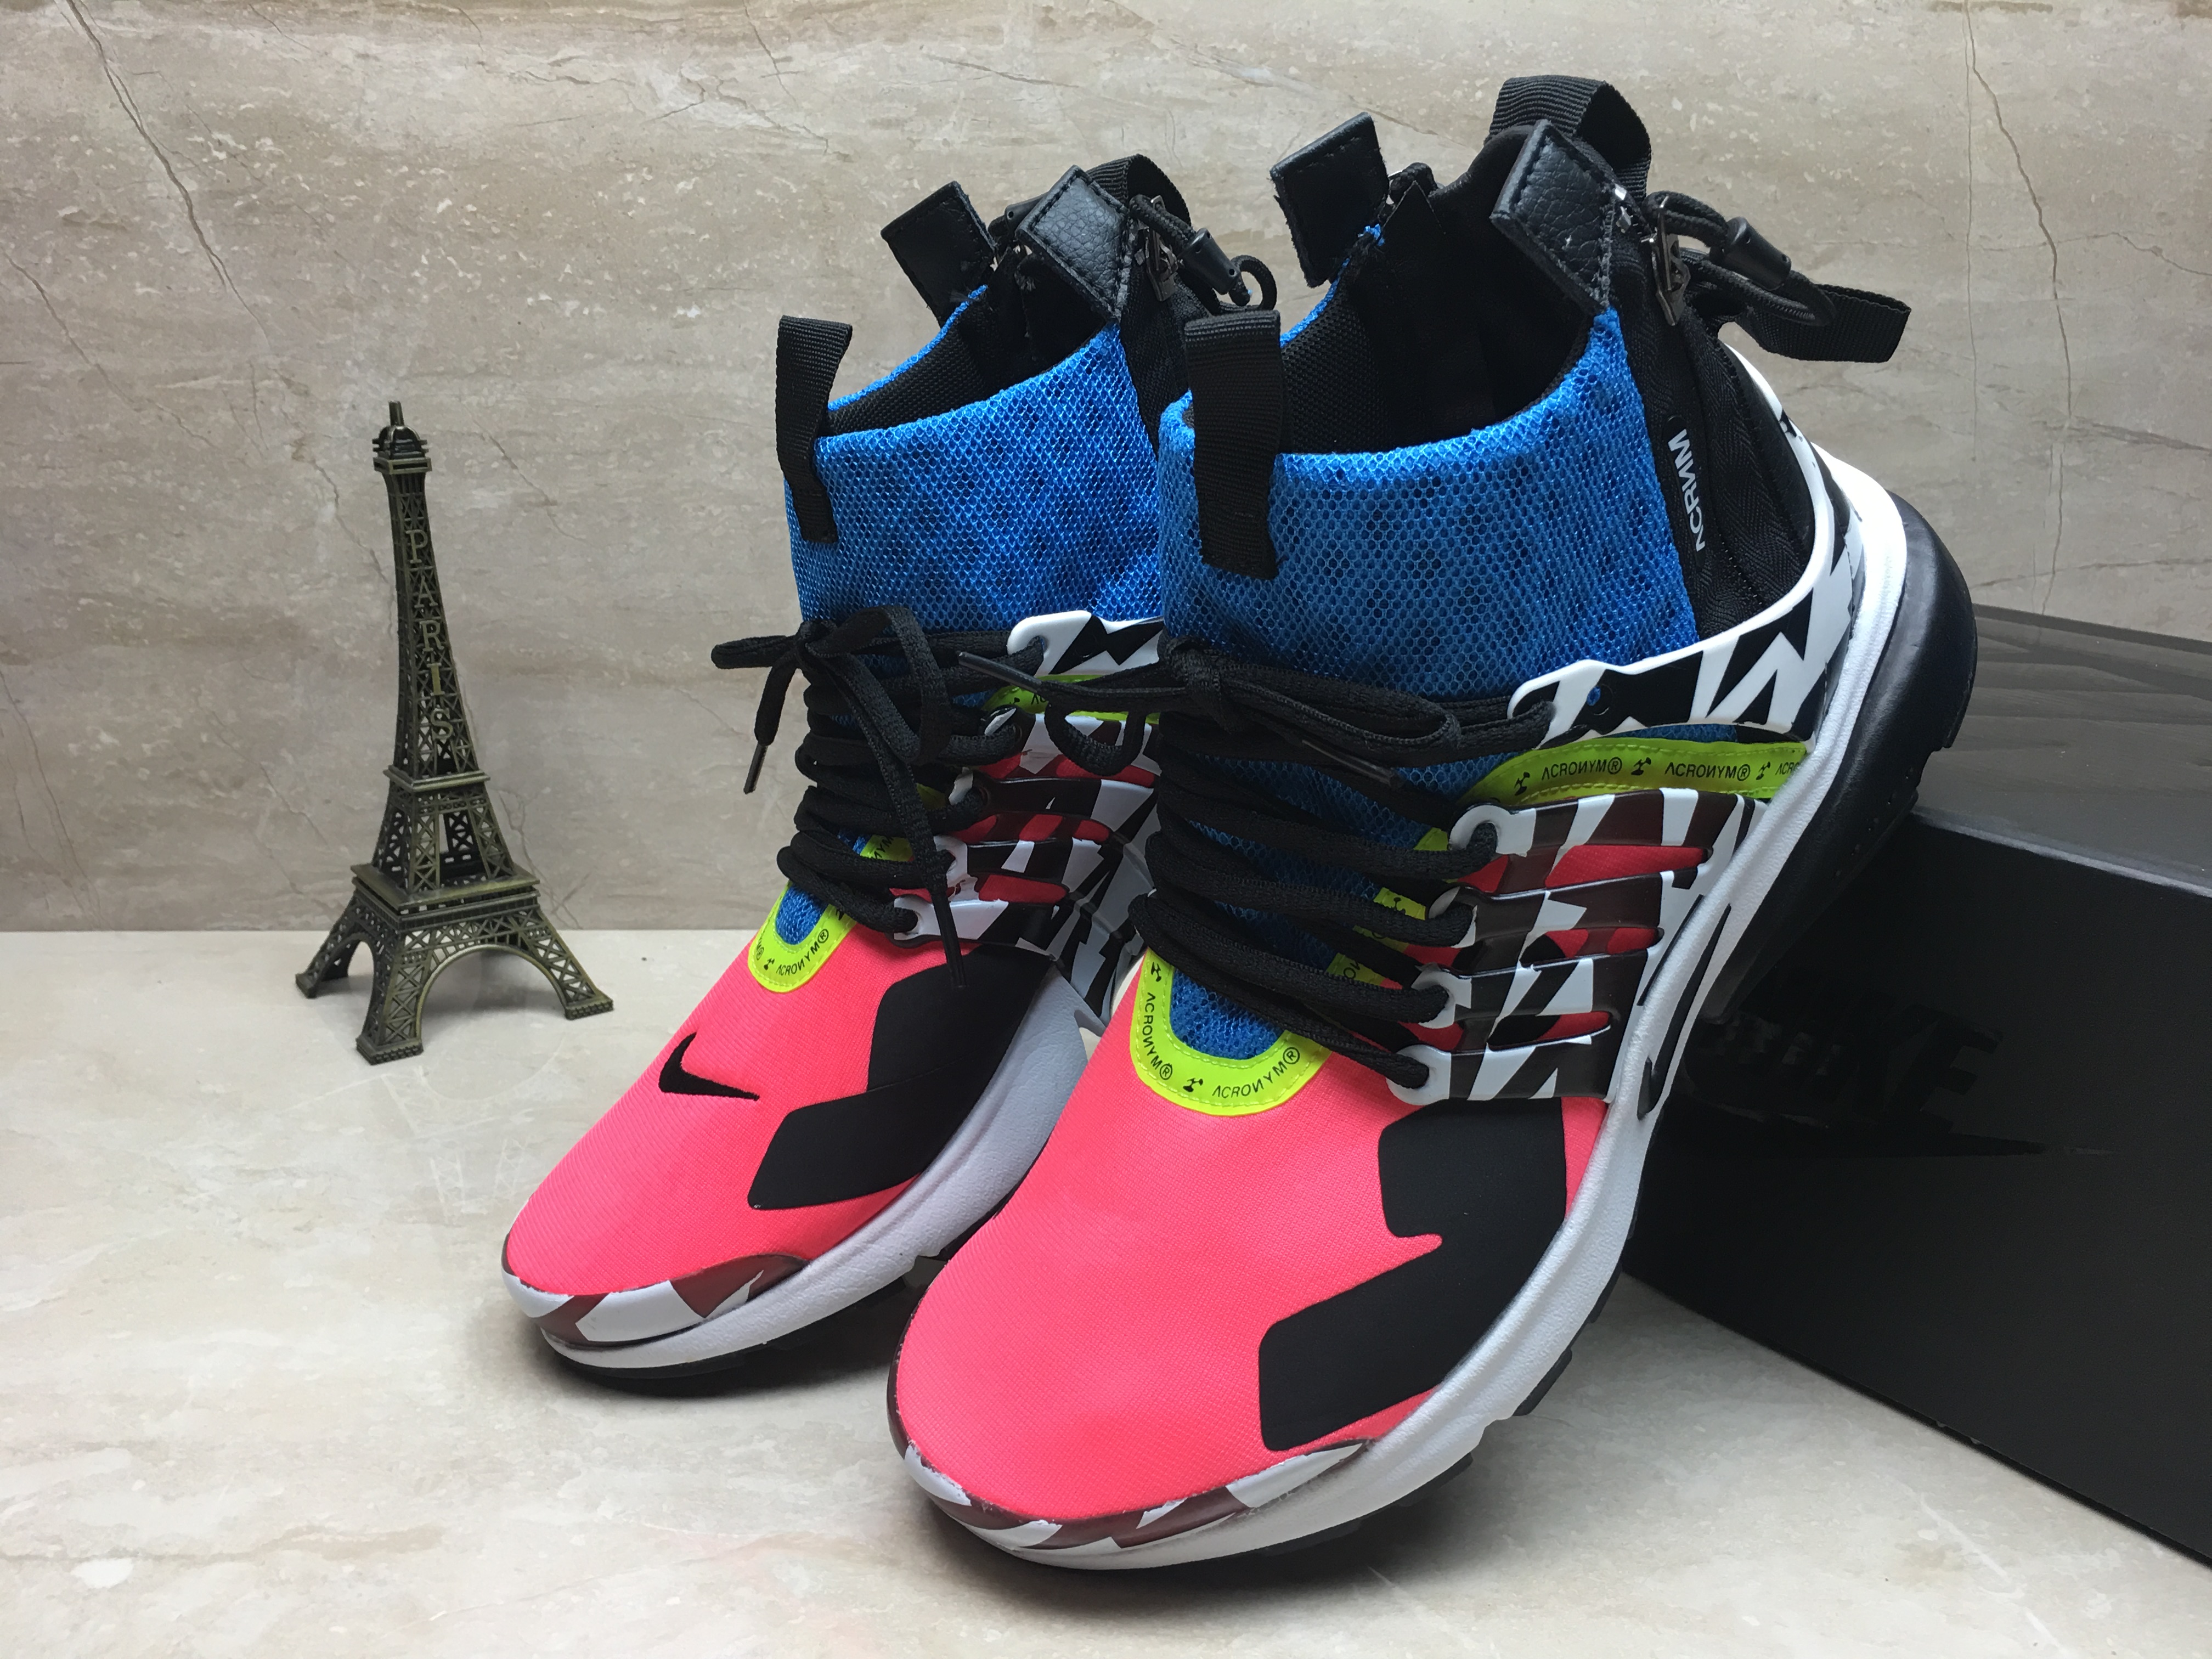 Men Acronym x Nike Air Presto Mid Colorful Shoes - Click Image to Close